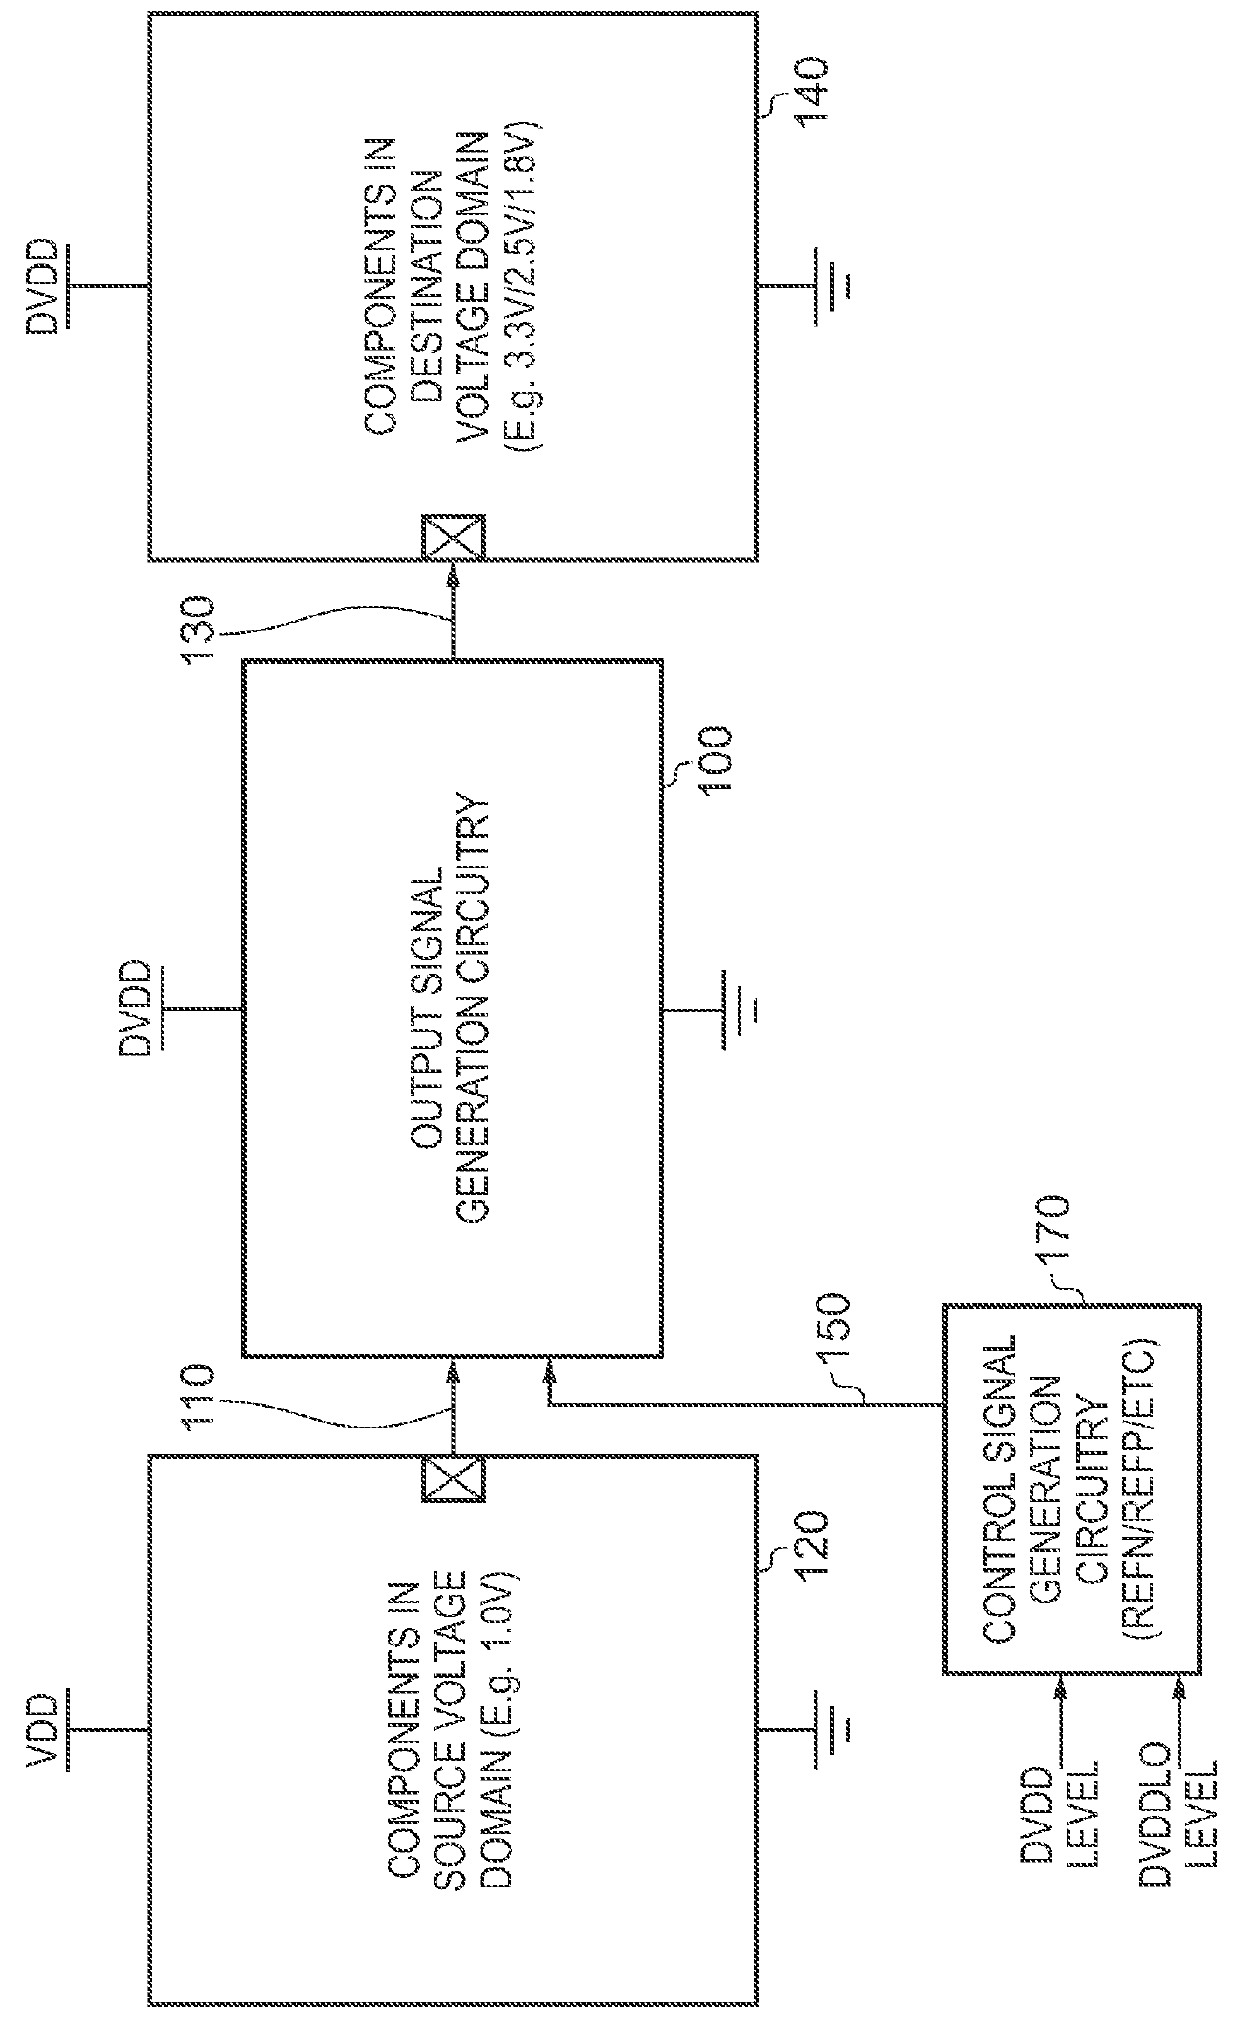 Output Signal Generation Circuitry for Converting an Input Signal From a Source Voltage Domain Into an Output Signal for a Destination Voltage Domain